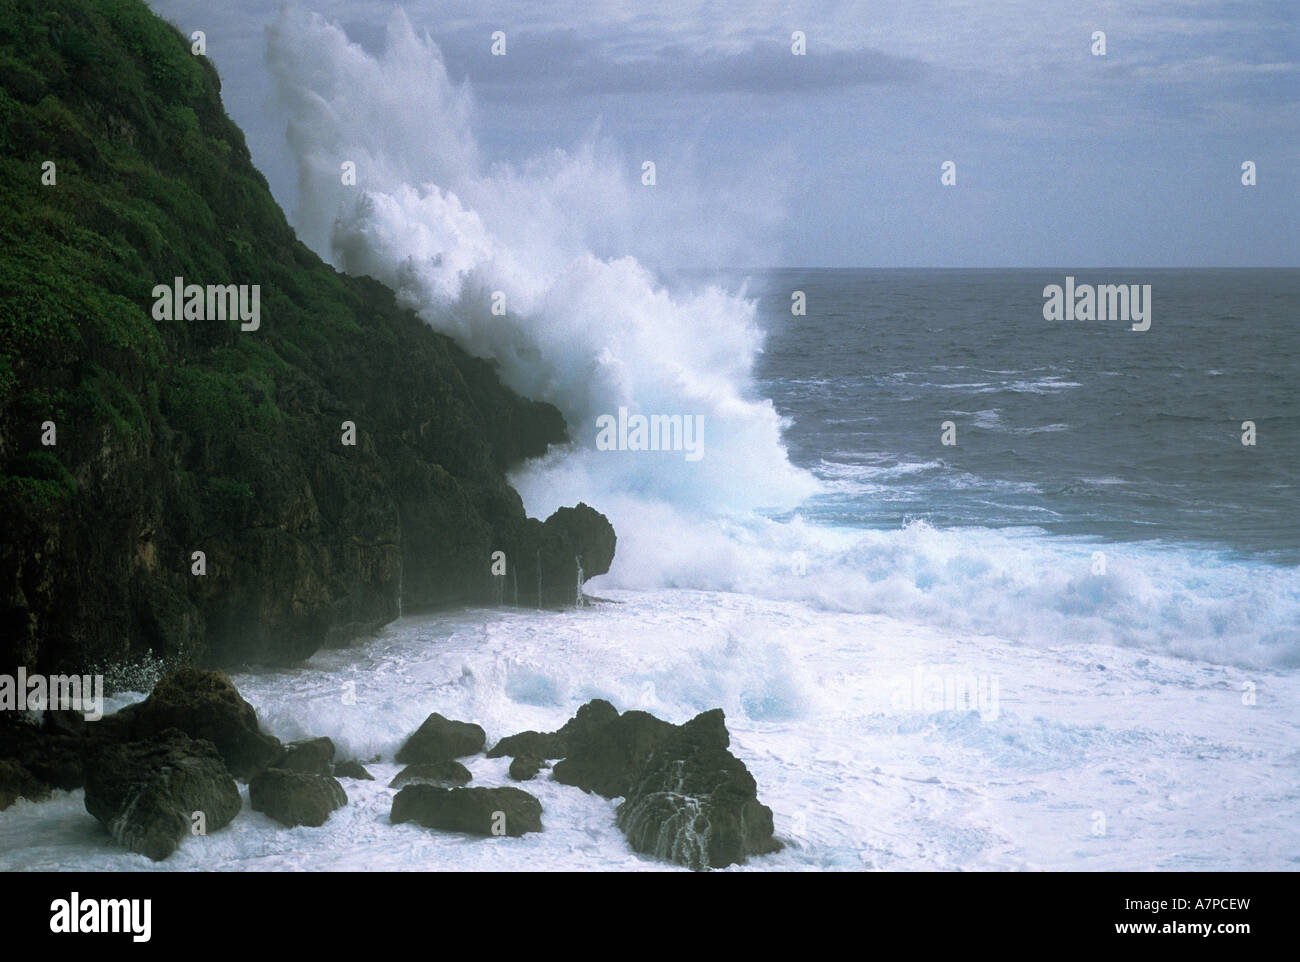 Sea cliff and storm surf from Super Typhoon Sudal Philippine Sea Island of Guam USA April 2005 Stock Photo